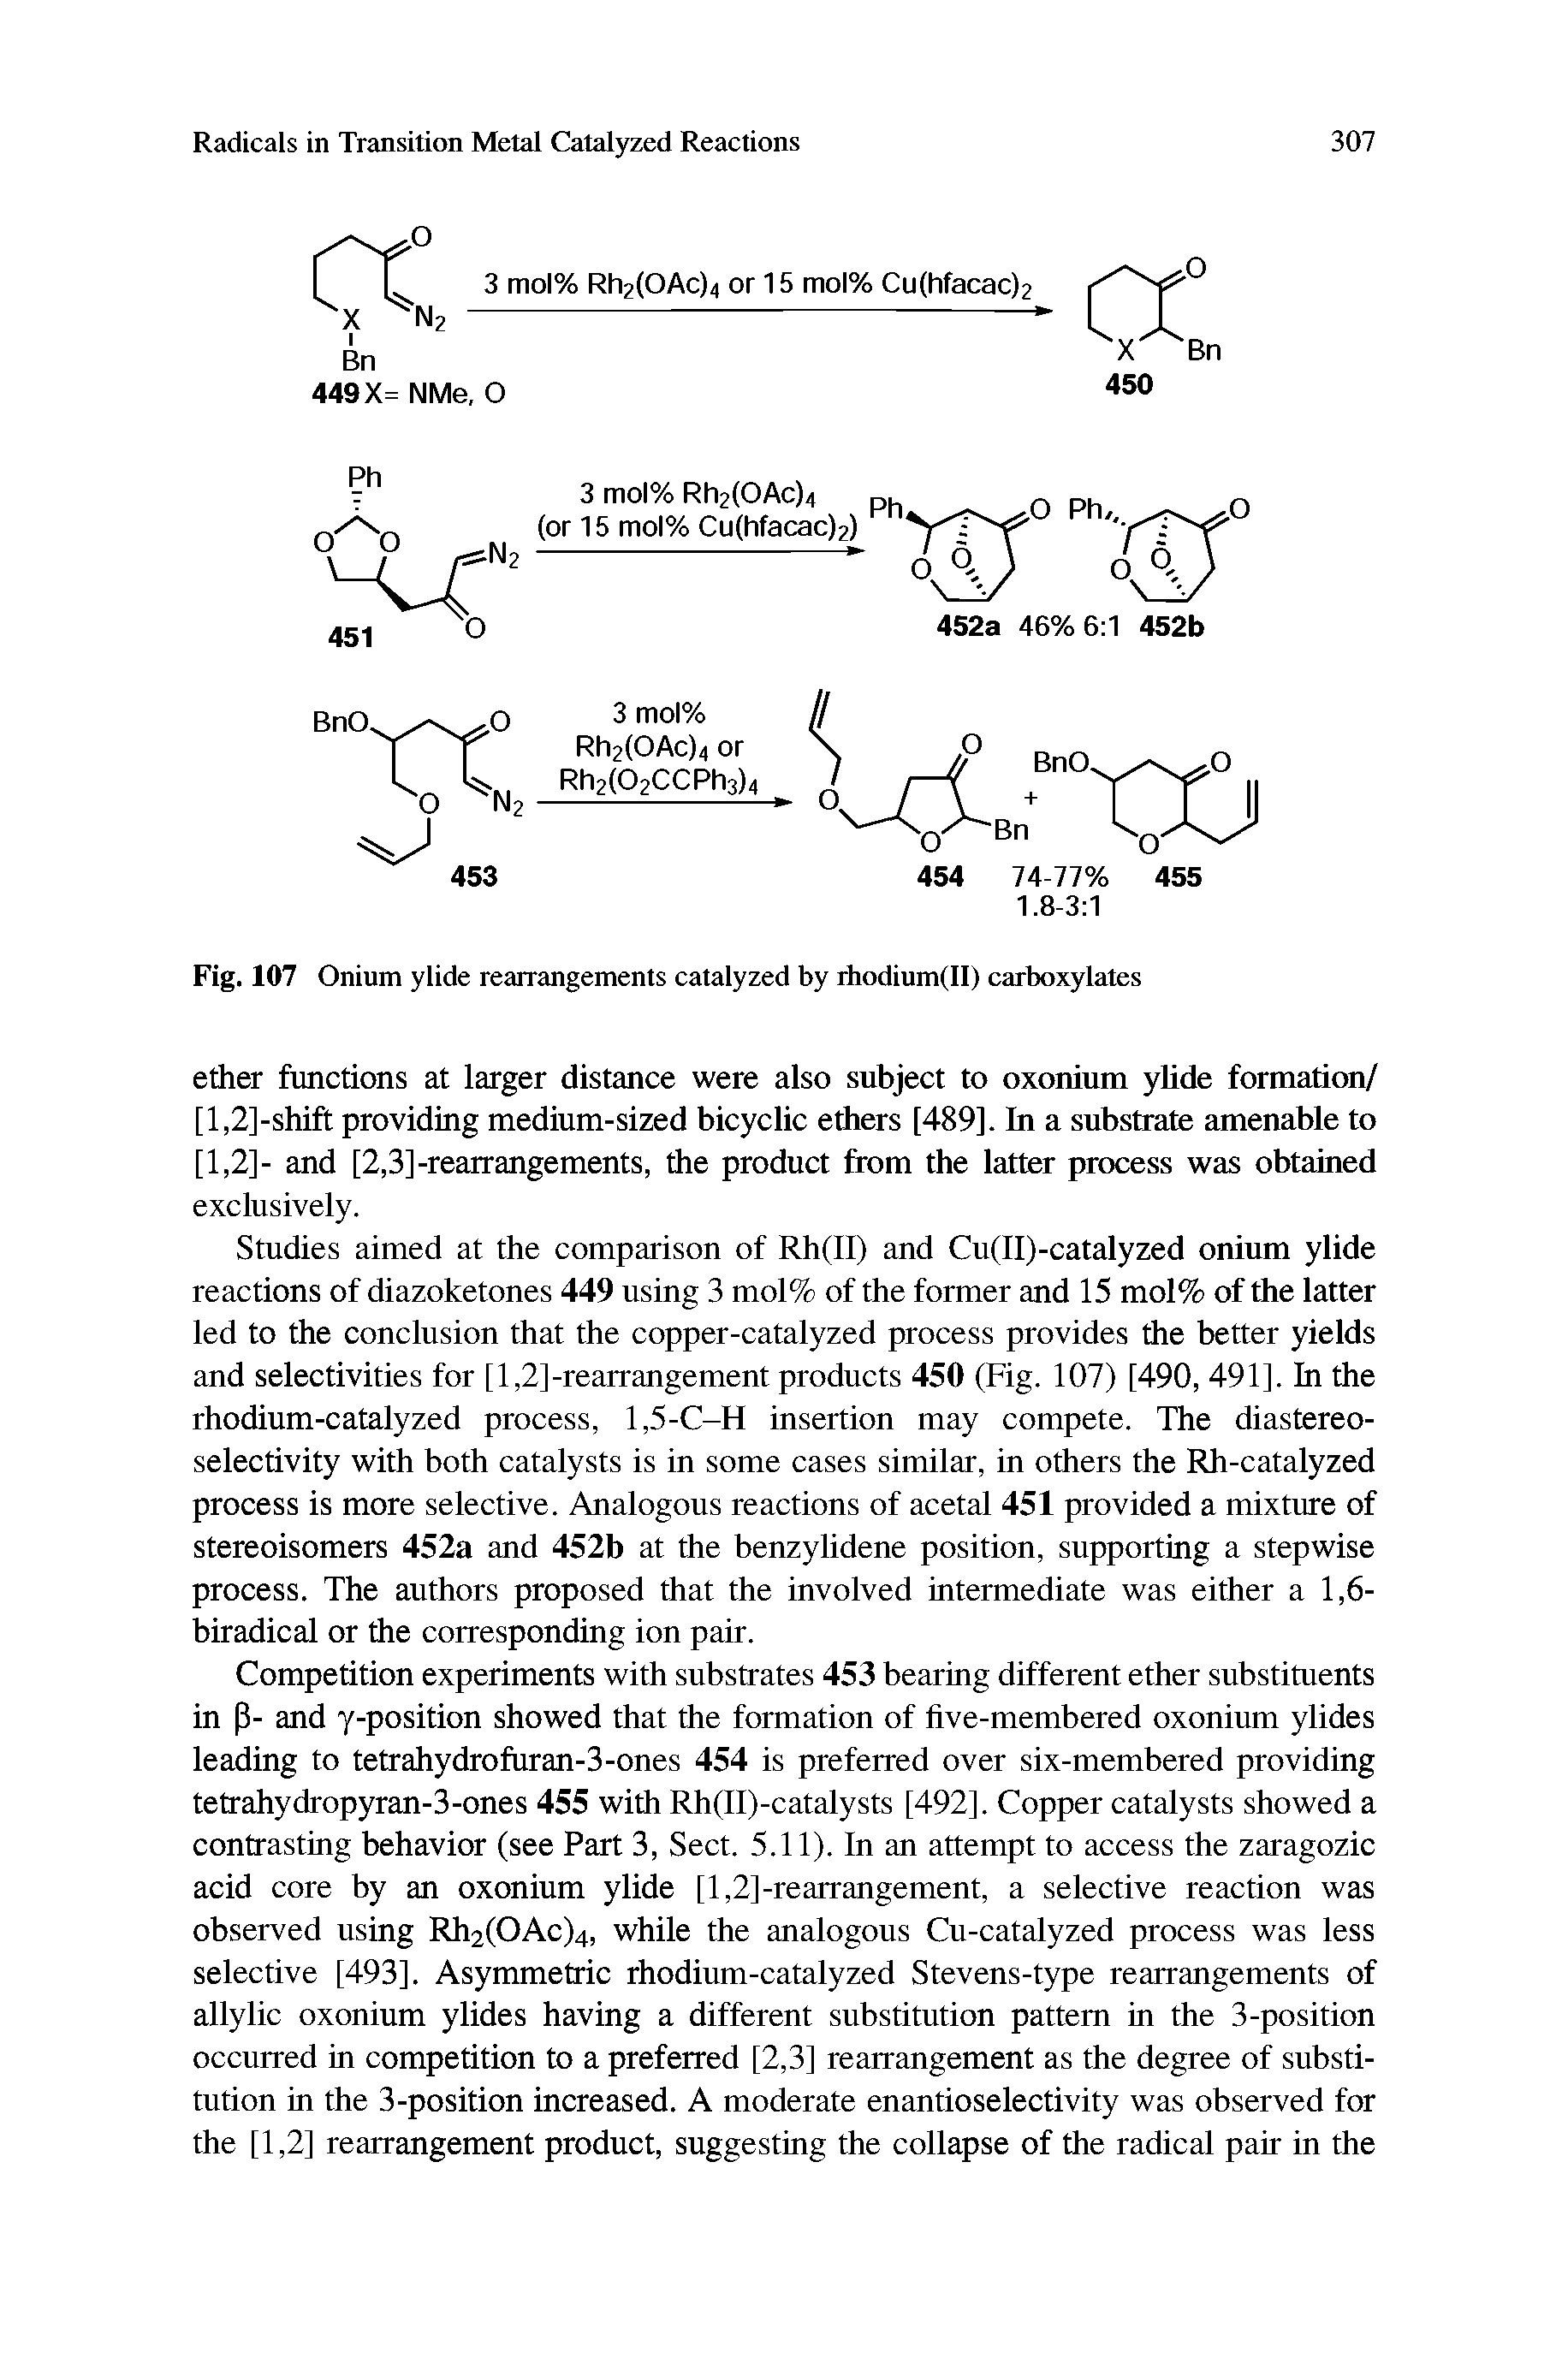 Fig. 107 Onium ylide rearrangements catalyzed by rhodium(II) carboxylates...